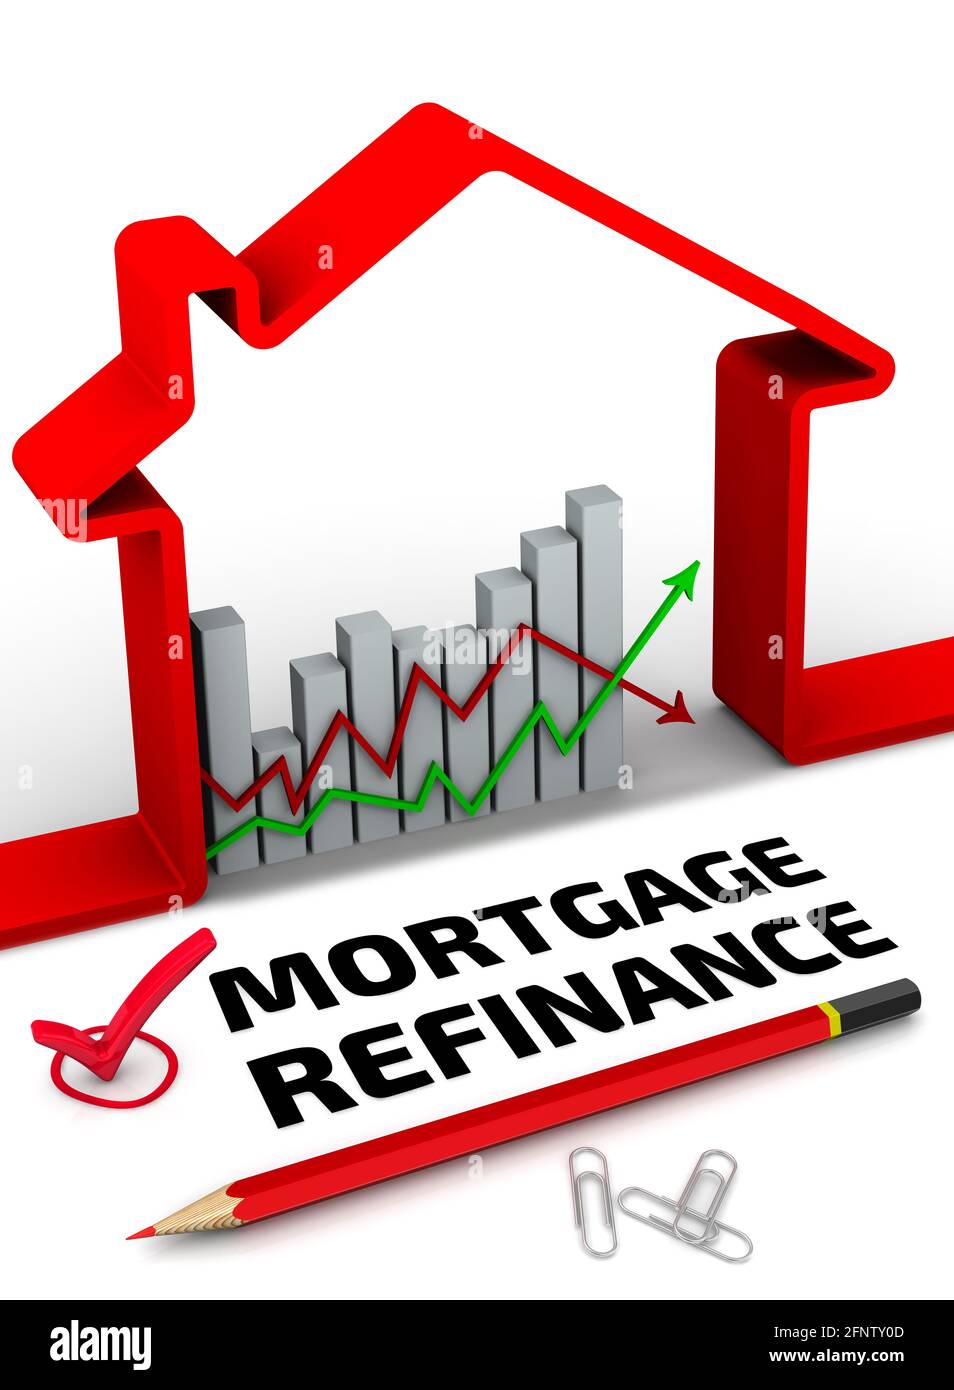 Mortgage refinance. One red check mark with black text MORTGAGE REFINANCE, a chart changes in interest rates on mortgages, a red symbol of house... Stock Photo